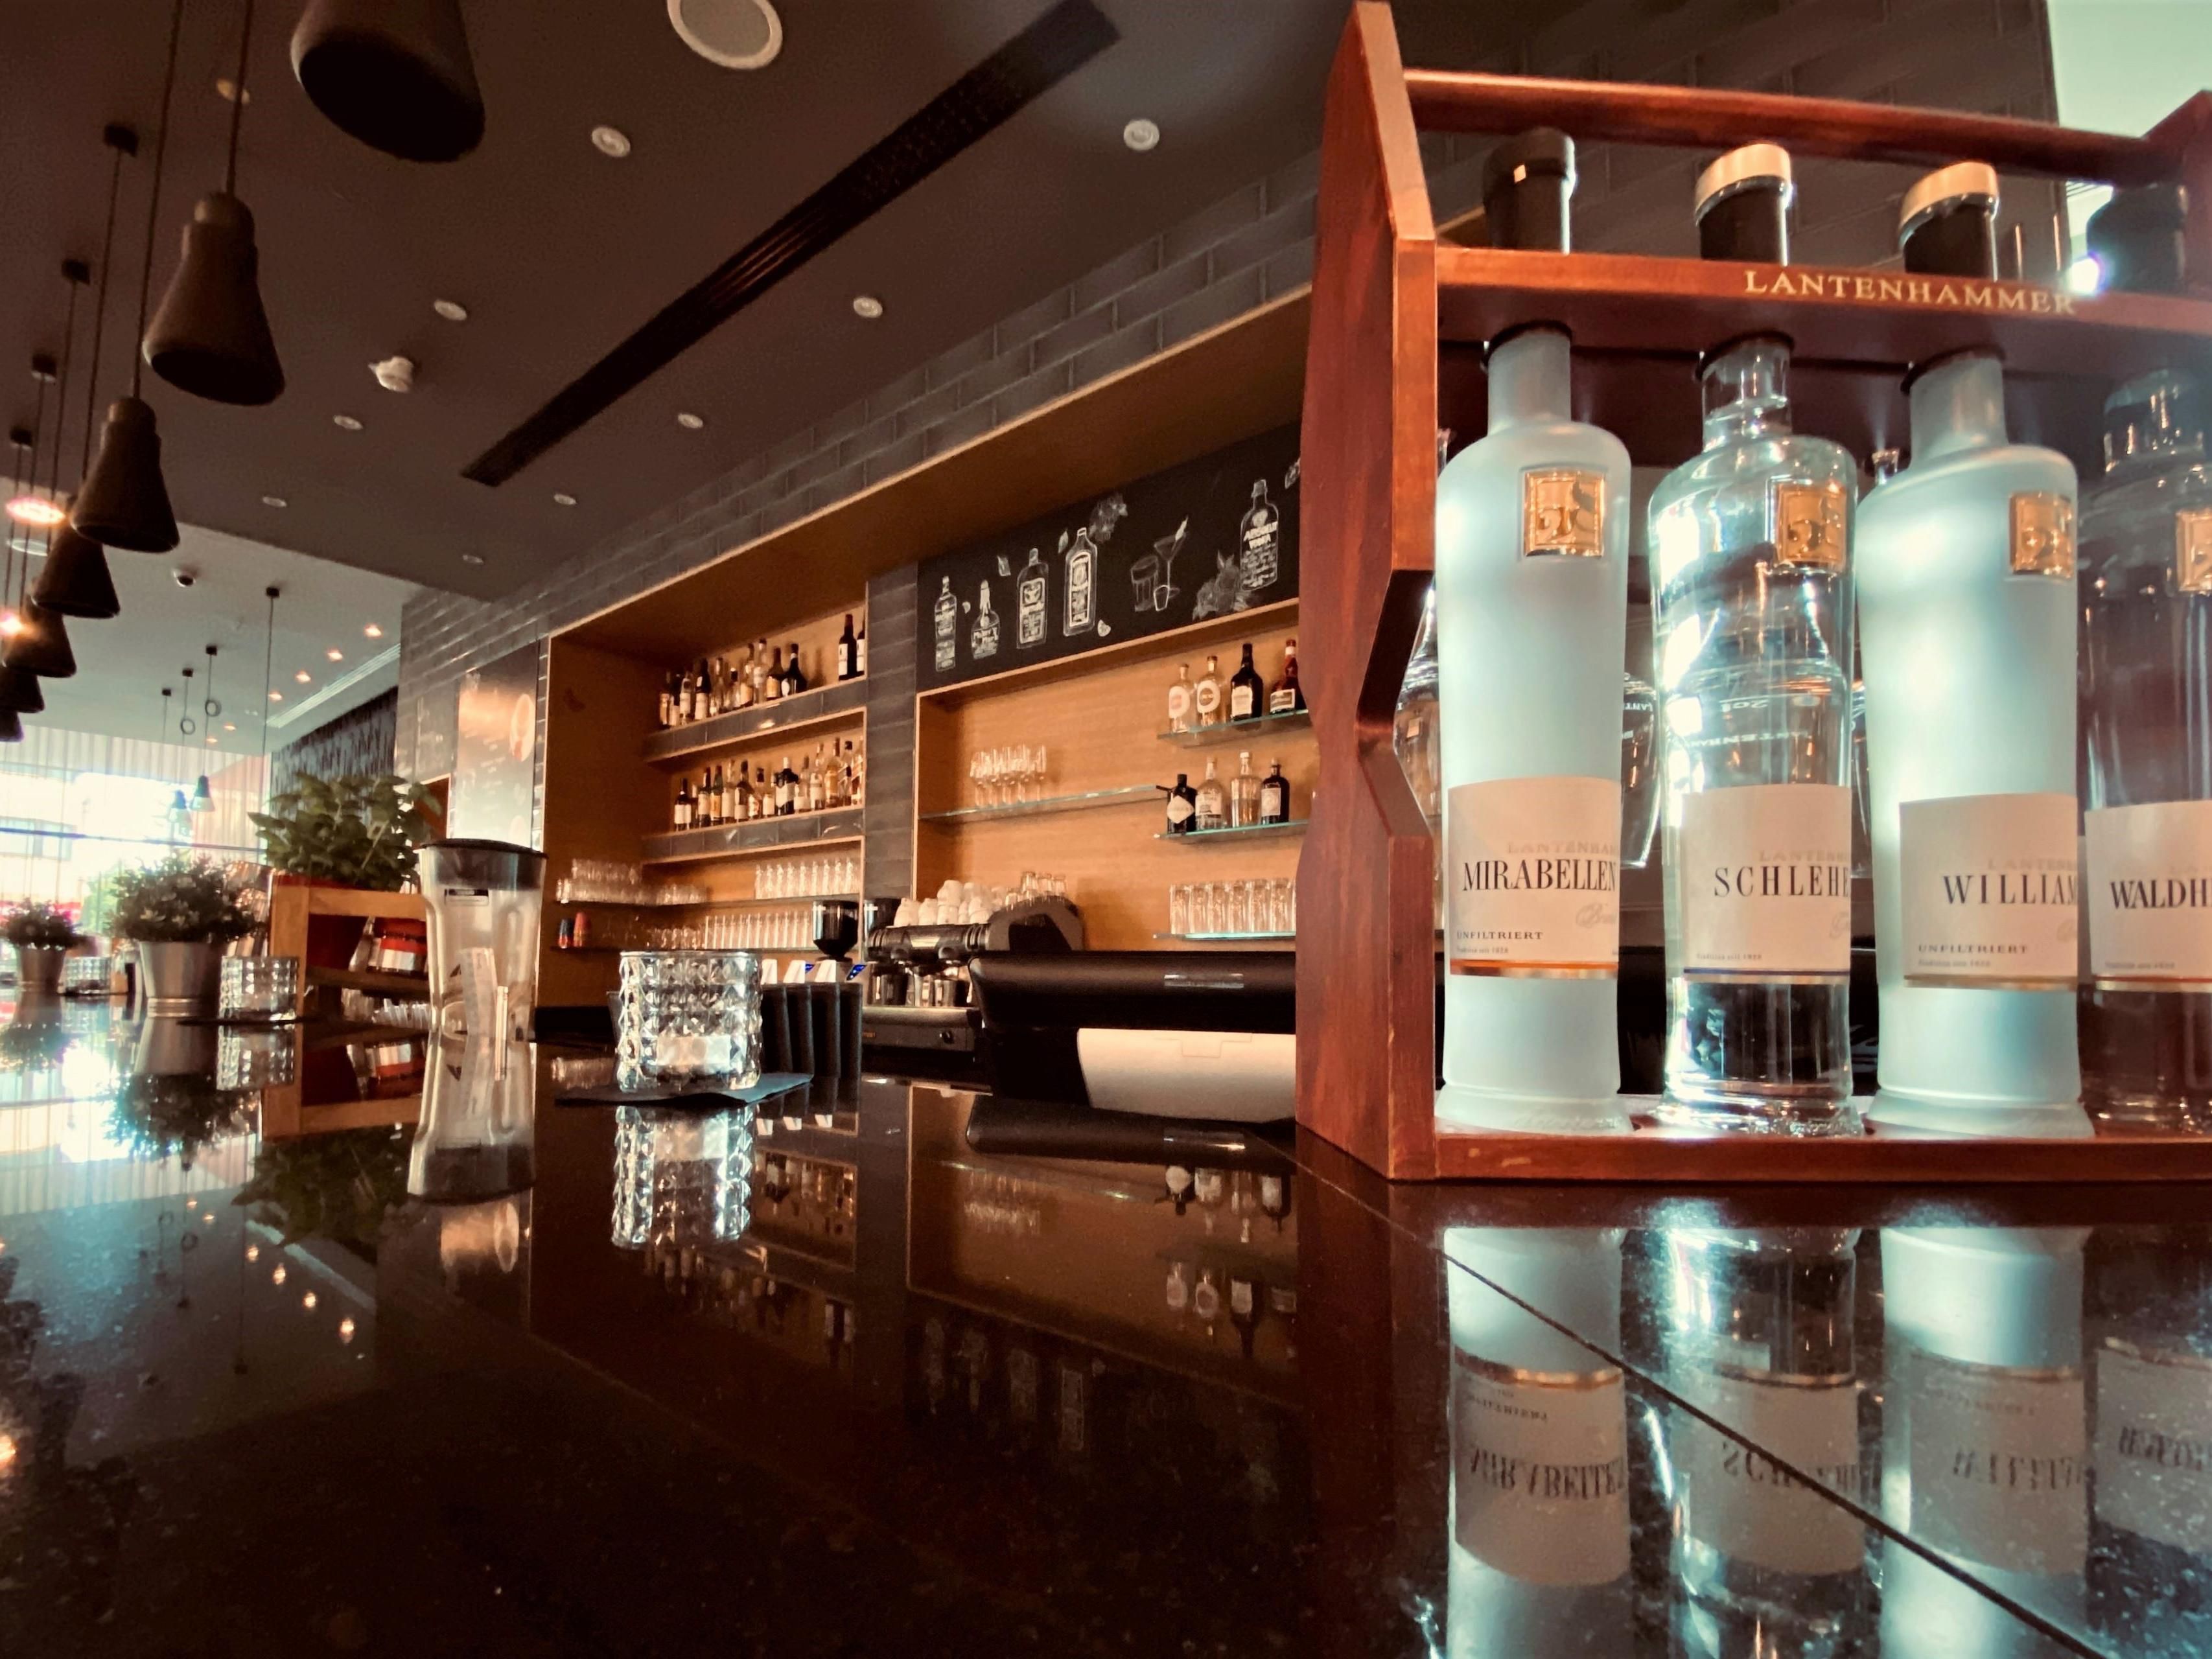 Visit us in our open lobby bar for our cocktail happy hour. Enjoy delicious drinks created by our team for only € 6.00 per cocktail every day from 6:00 p.m. to 7:00 p.m.. Please note the applicable Covid-19 rules.